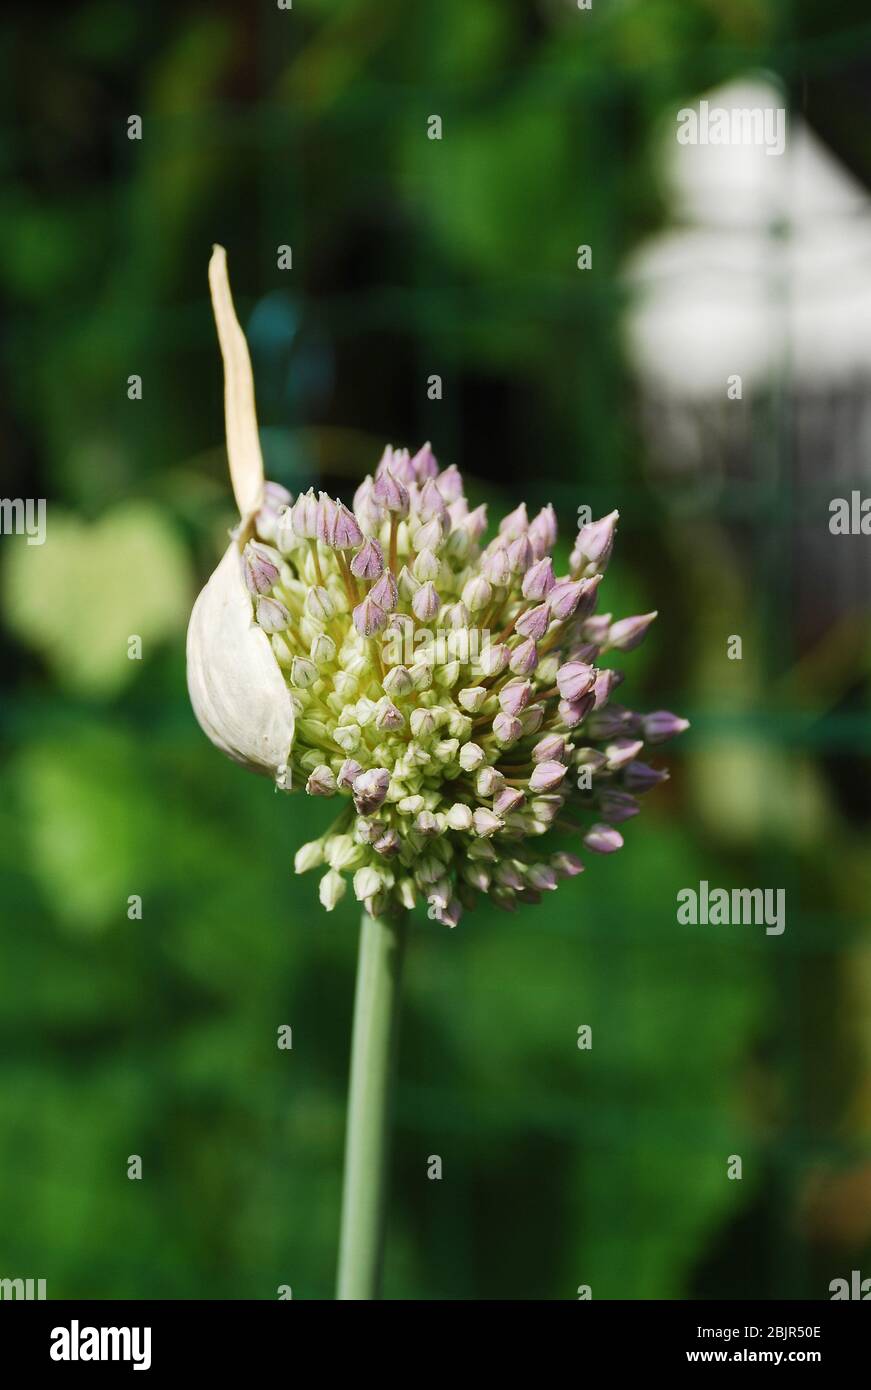 An allium flower blossoms from out of its bud. This one is from a garlic plant in Italy Stock Photo